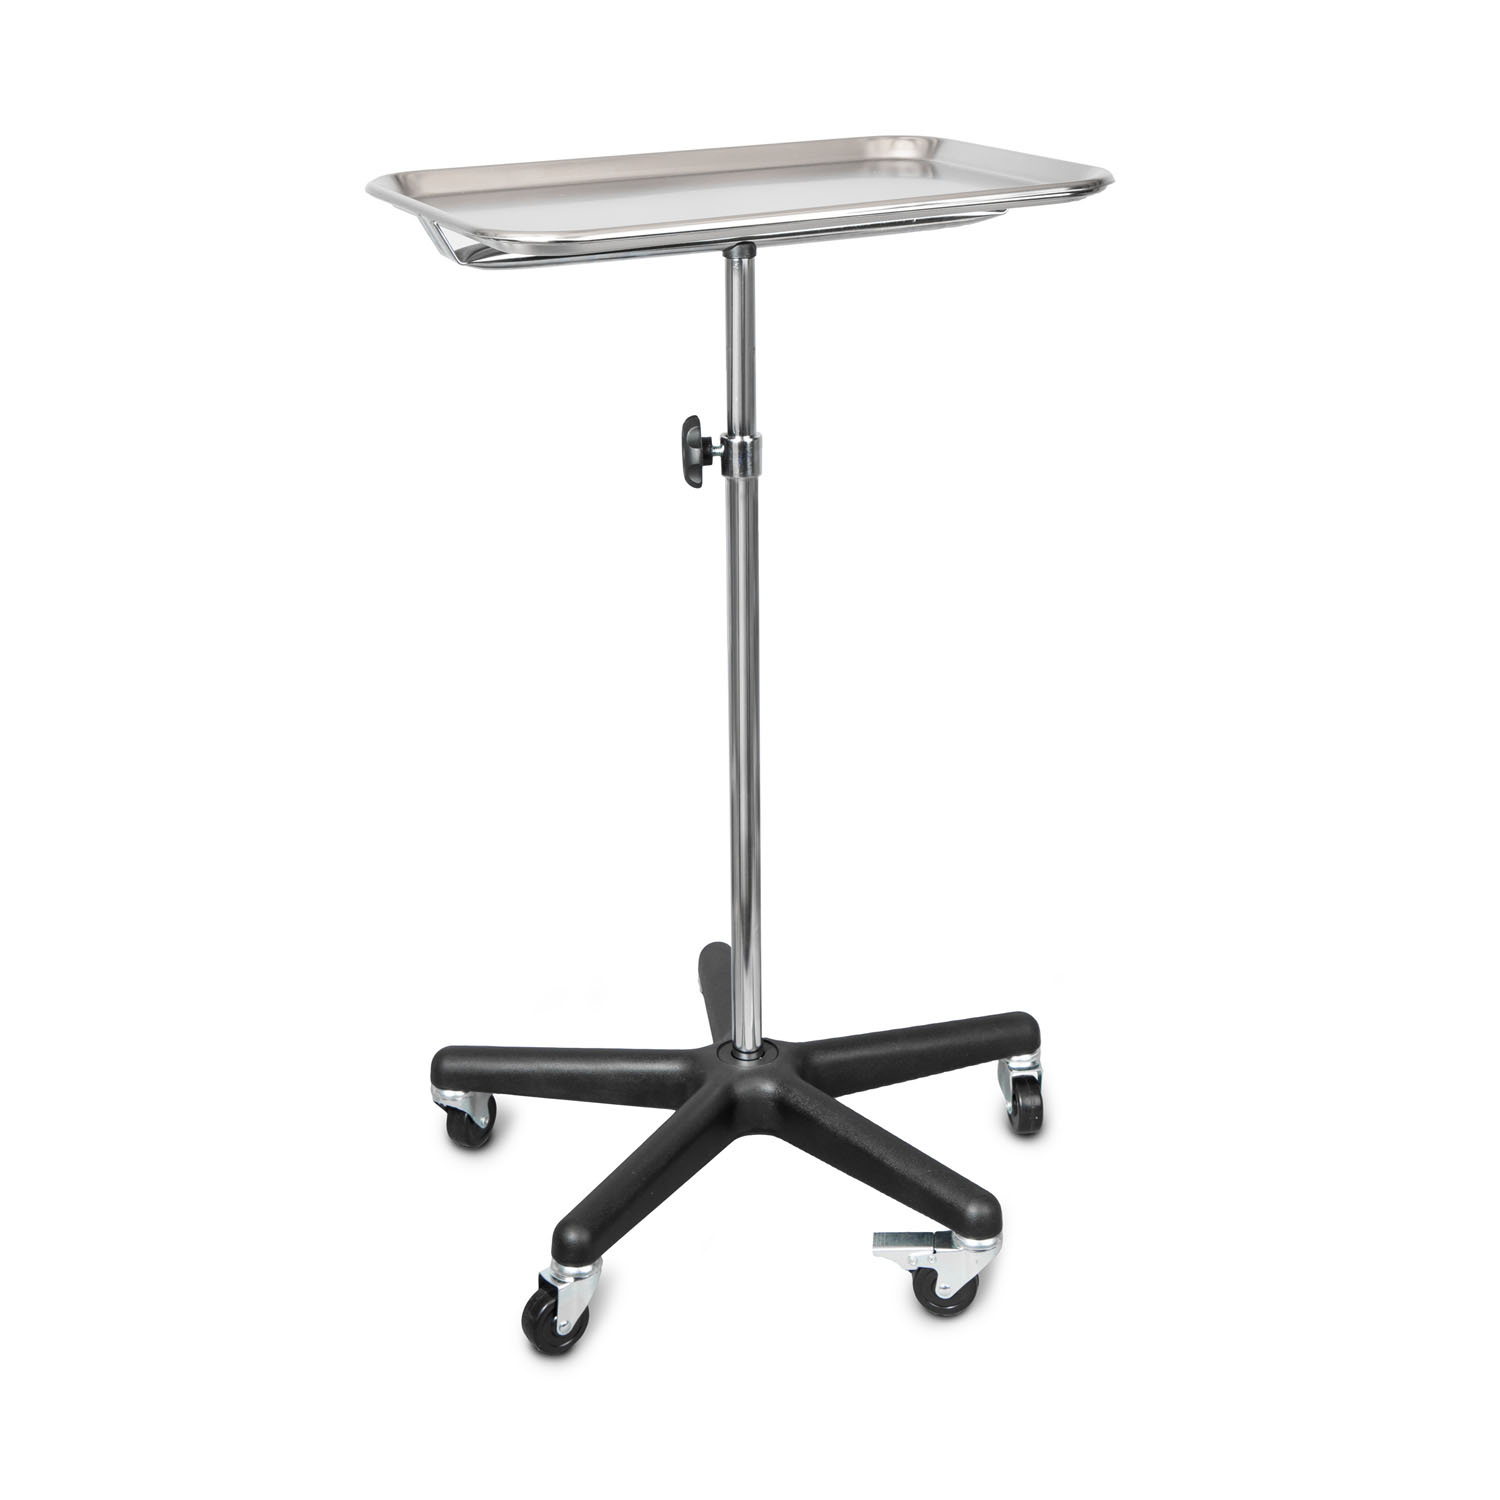 DUKAL TECH-MED MAYO STAND : 4365 EA $120.51 Stocked